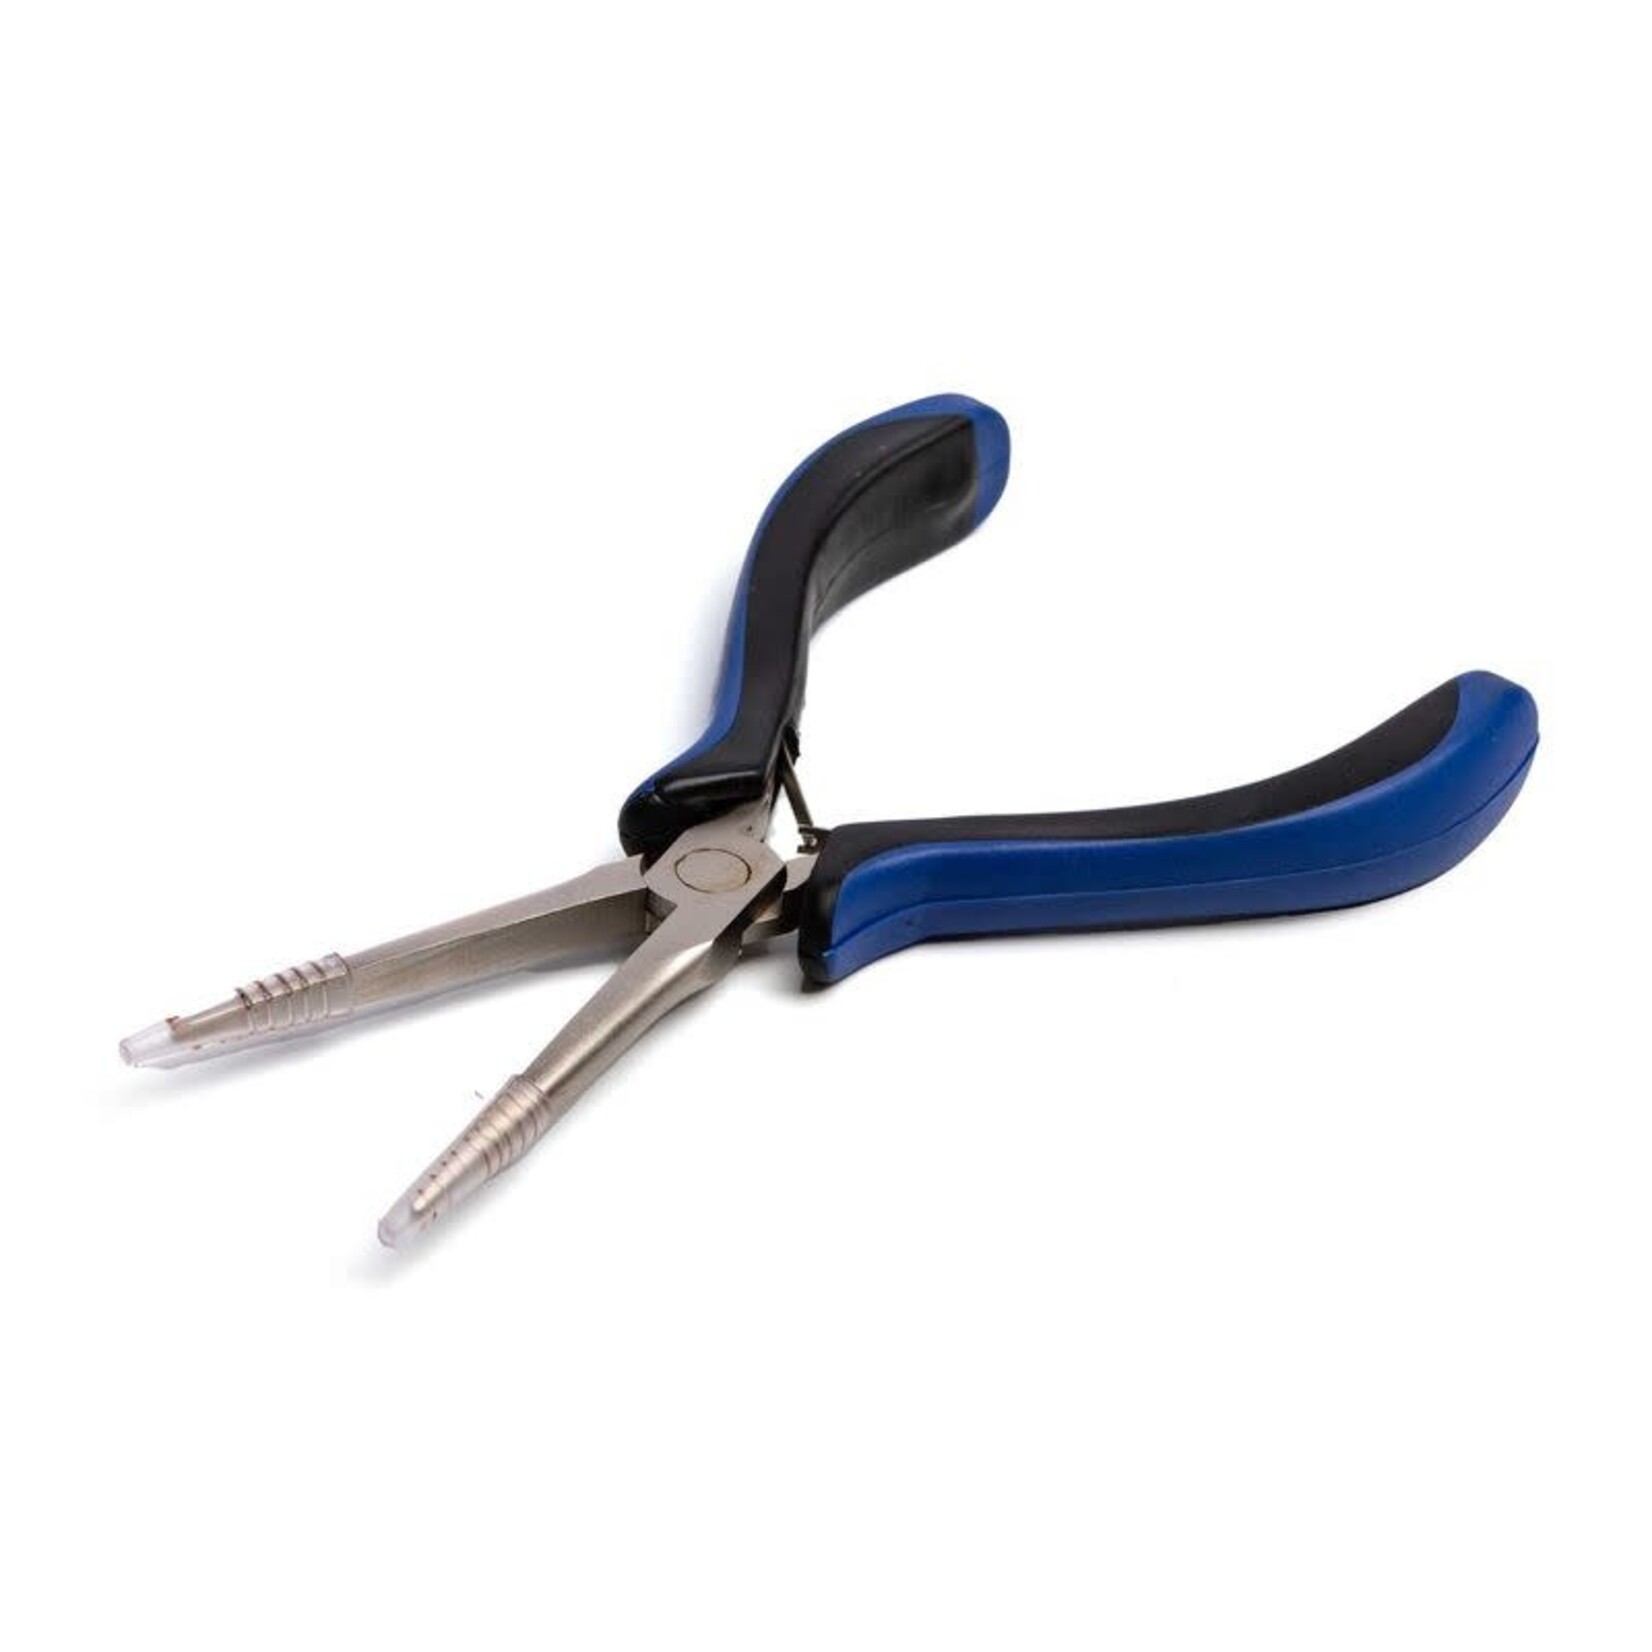 Hobby Essentials HDXK0056 Hobby Essentials PLIERS SPRINGLOADED NEEDLE NOSE